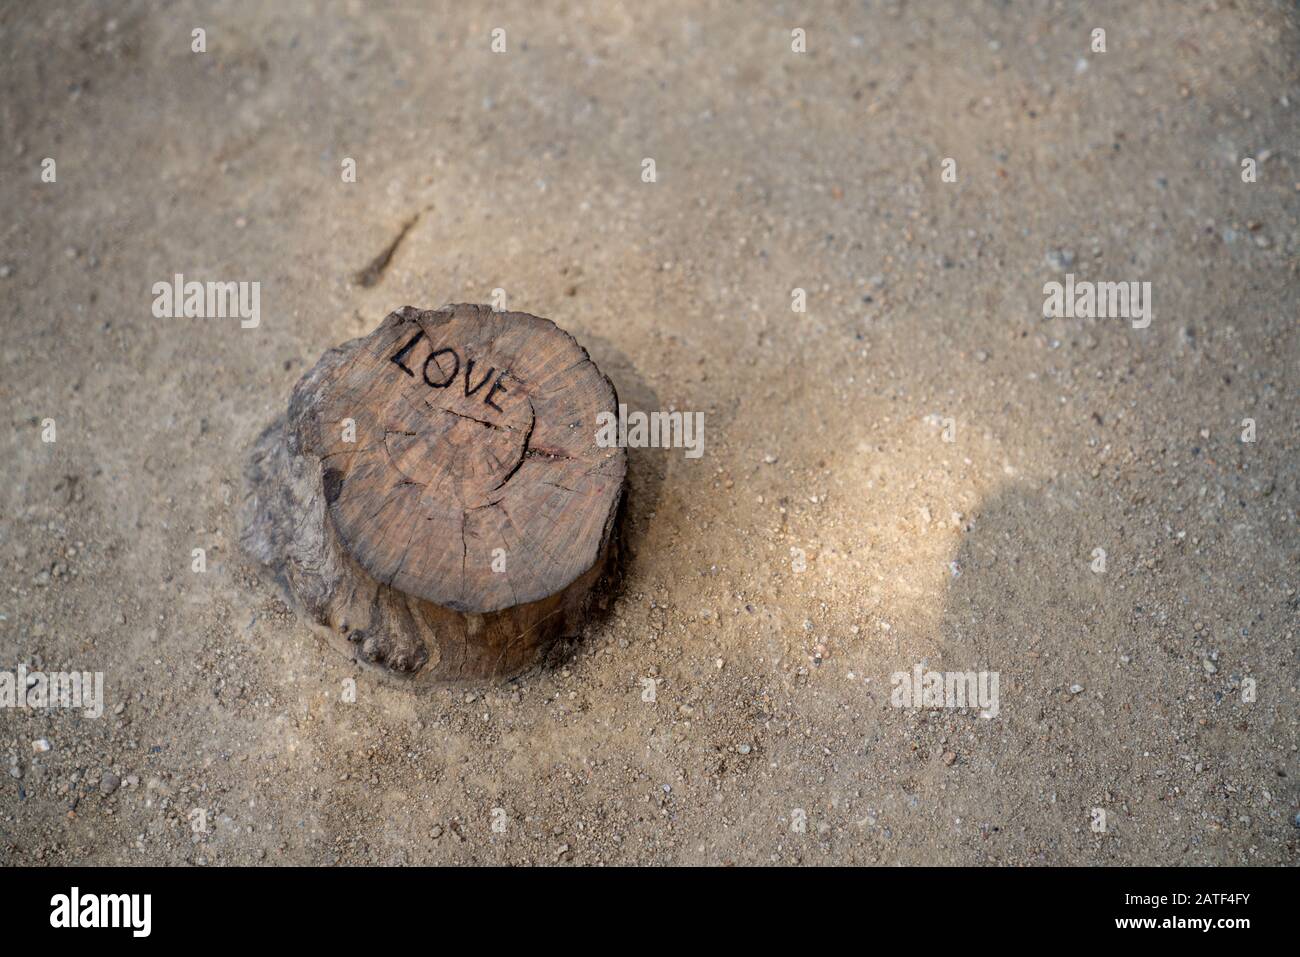 Love etched carved out on a small tree stump in sand pit Stock Photo